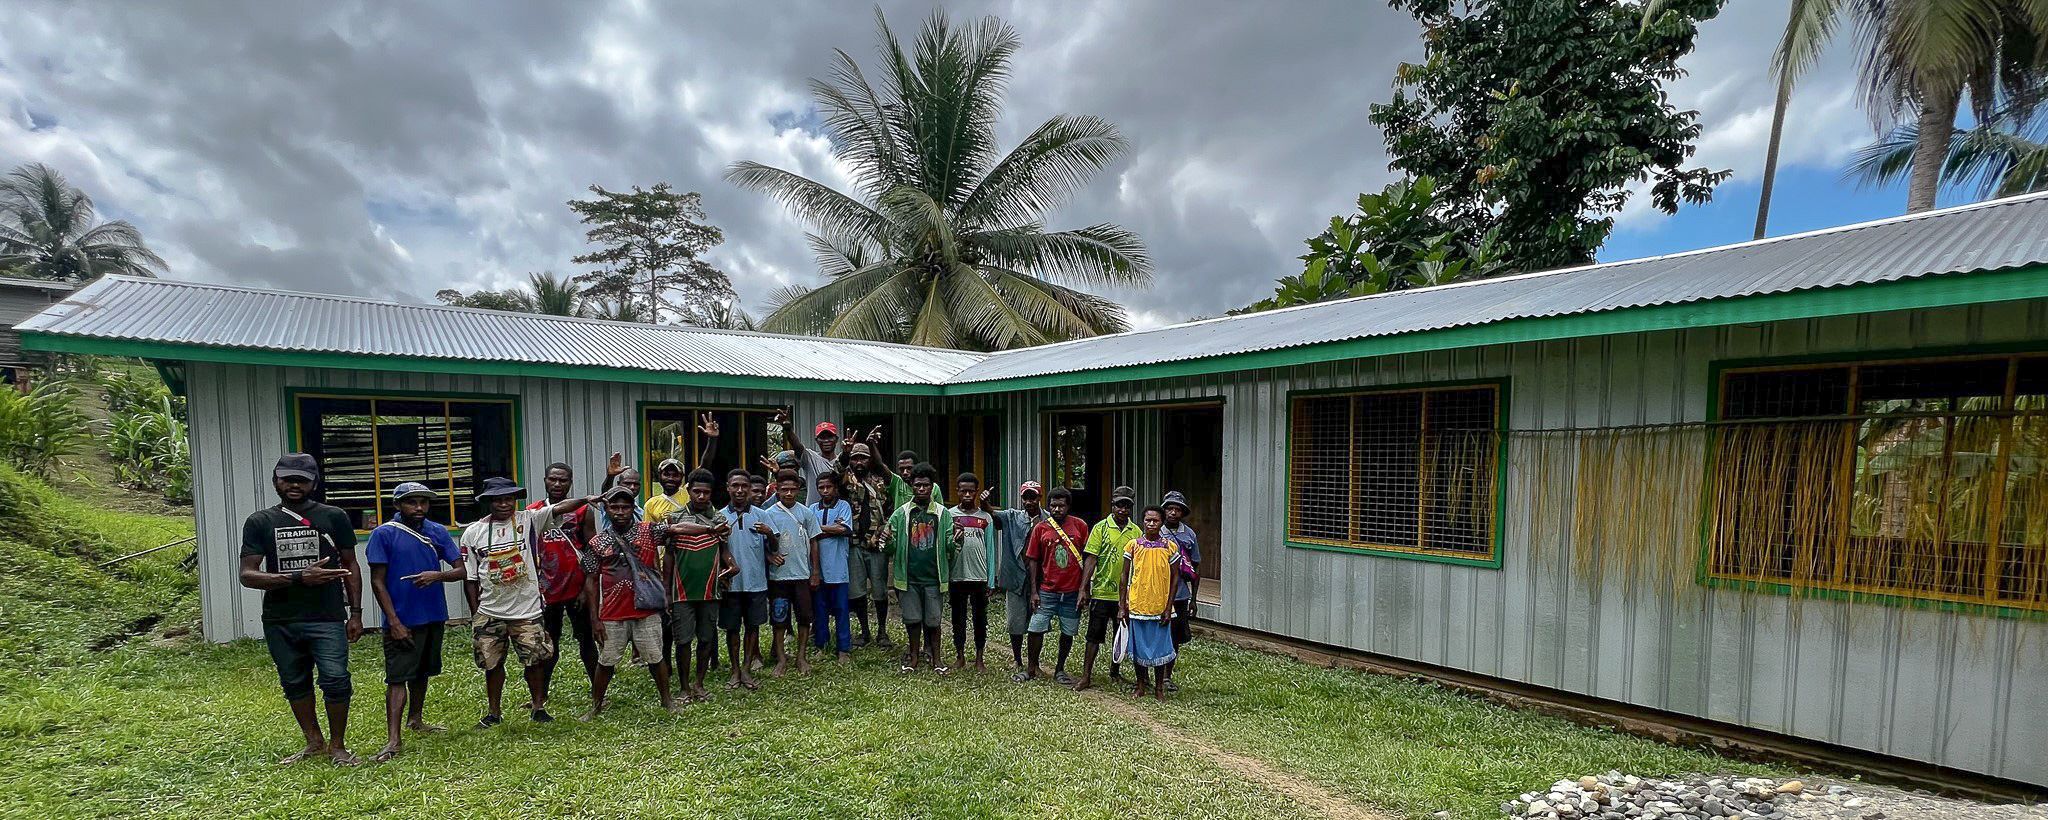 A new permanent structure elementary classroom built by the Hambini villagers, replacing the old space for children's education.